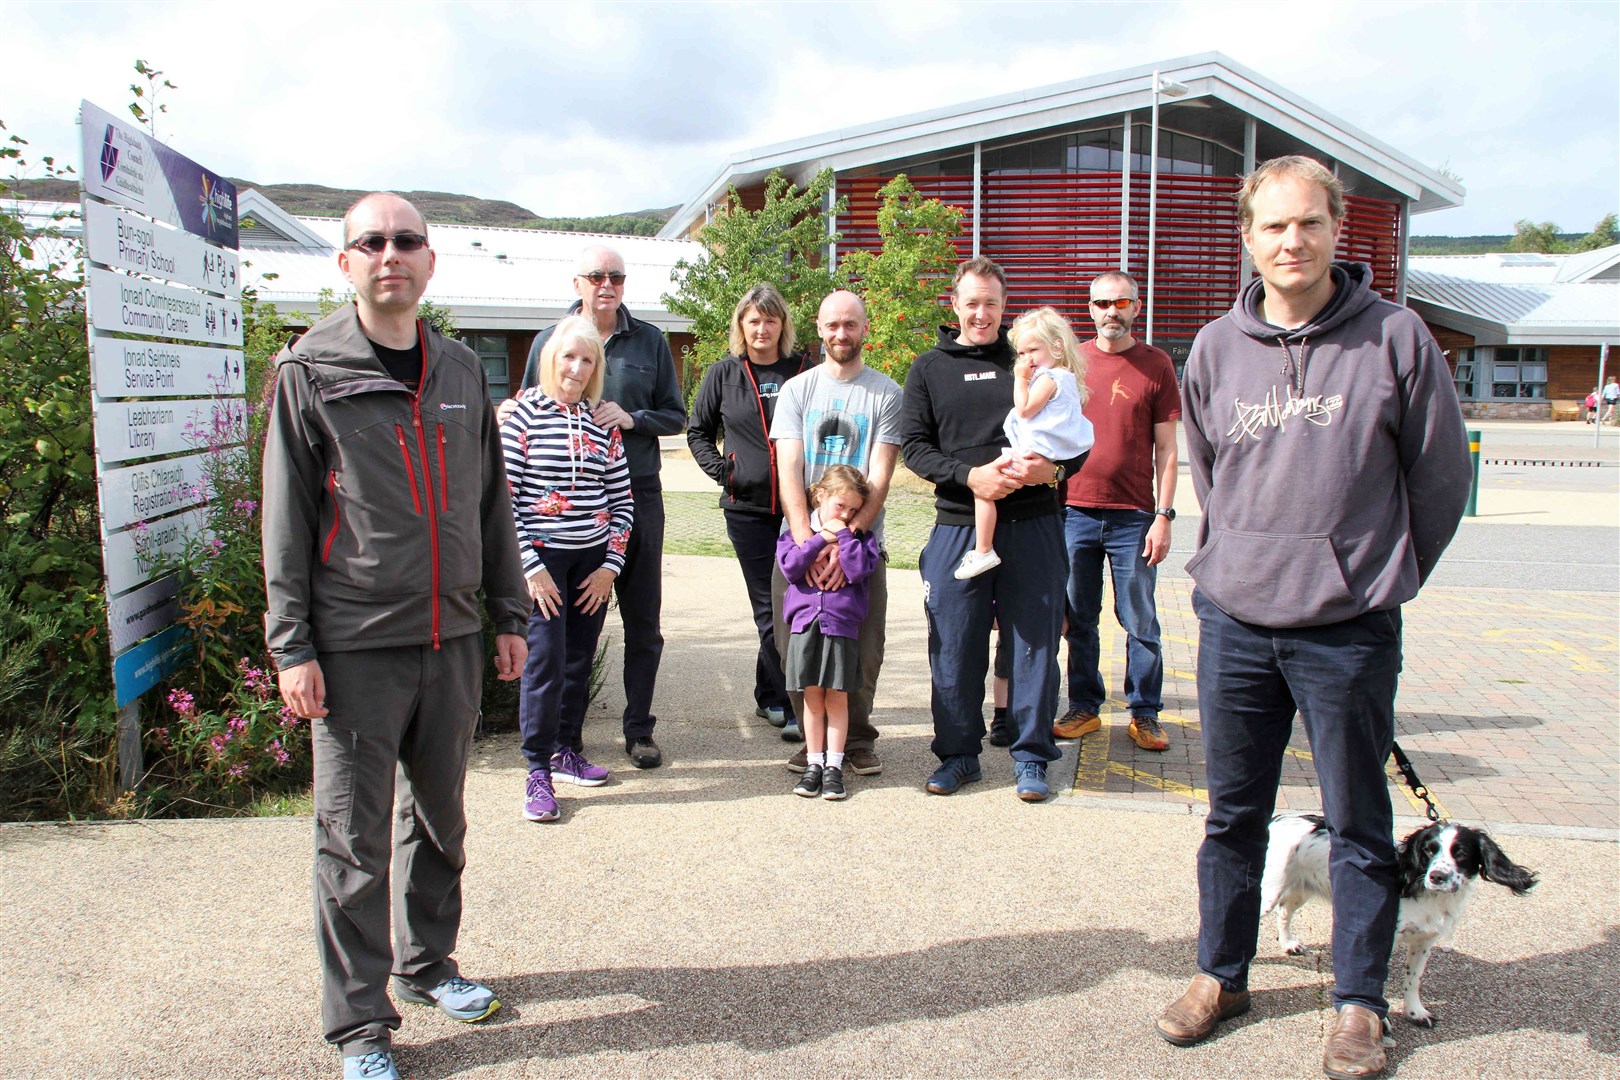 Andy Norrie (left) and Mike Dearman (right) with other parents and carers concerned about their children's education.